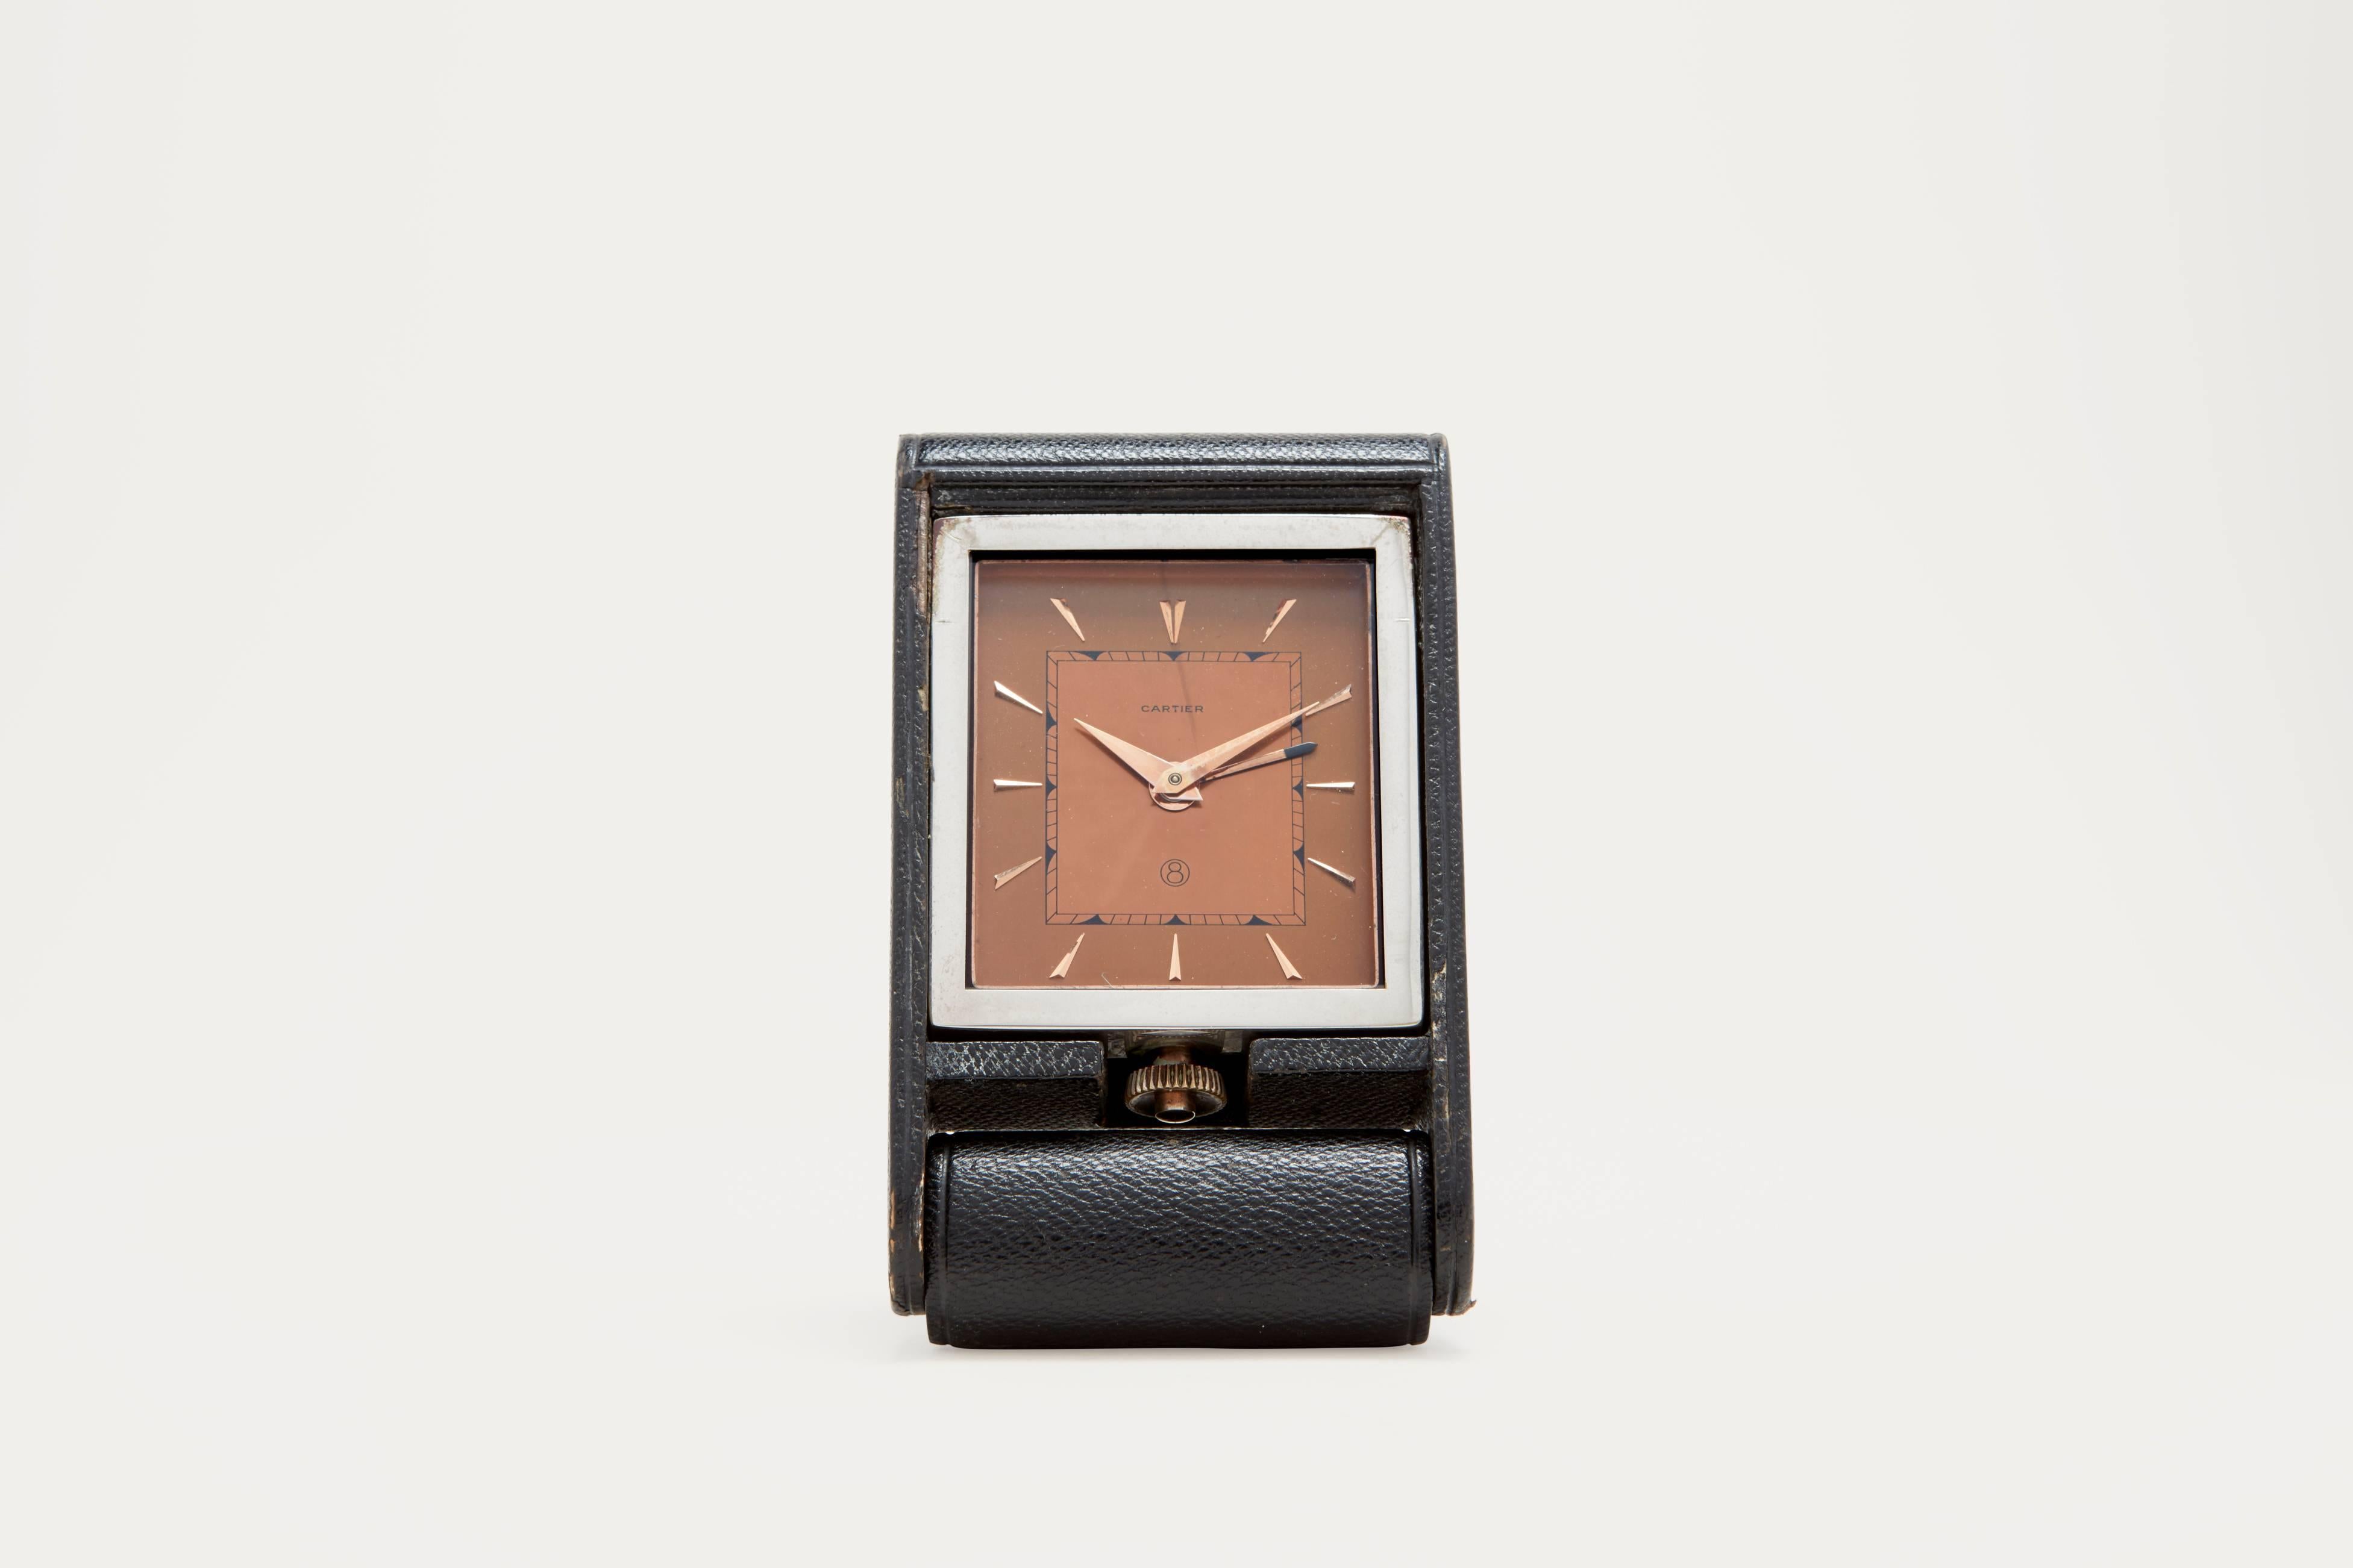 A chrome-plated and leather covered mechanical, eight day, folding, Cartier travel clock with alarm function. The clock design was originally conceived by Jaeger LeCoultre in the 1920s, and was called the 'Ados', and came in a variety of different